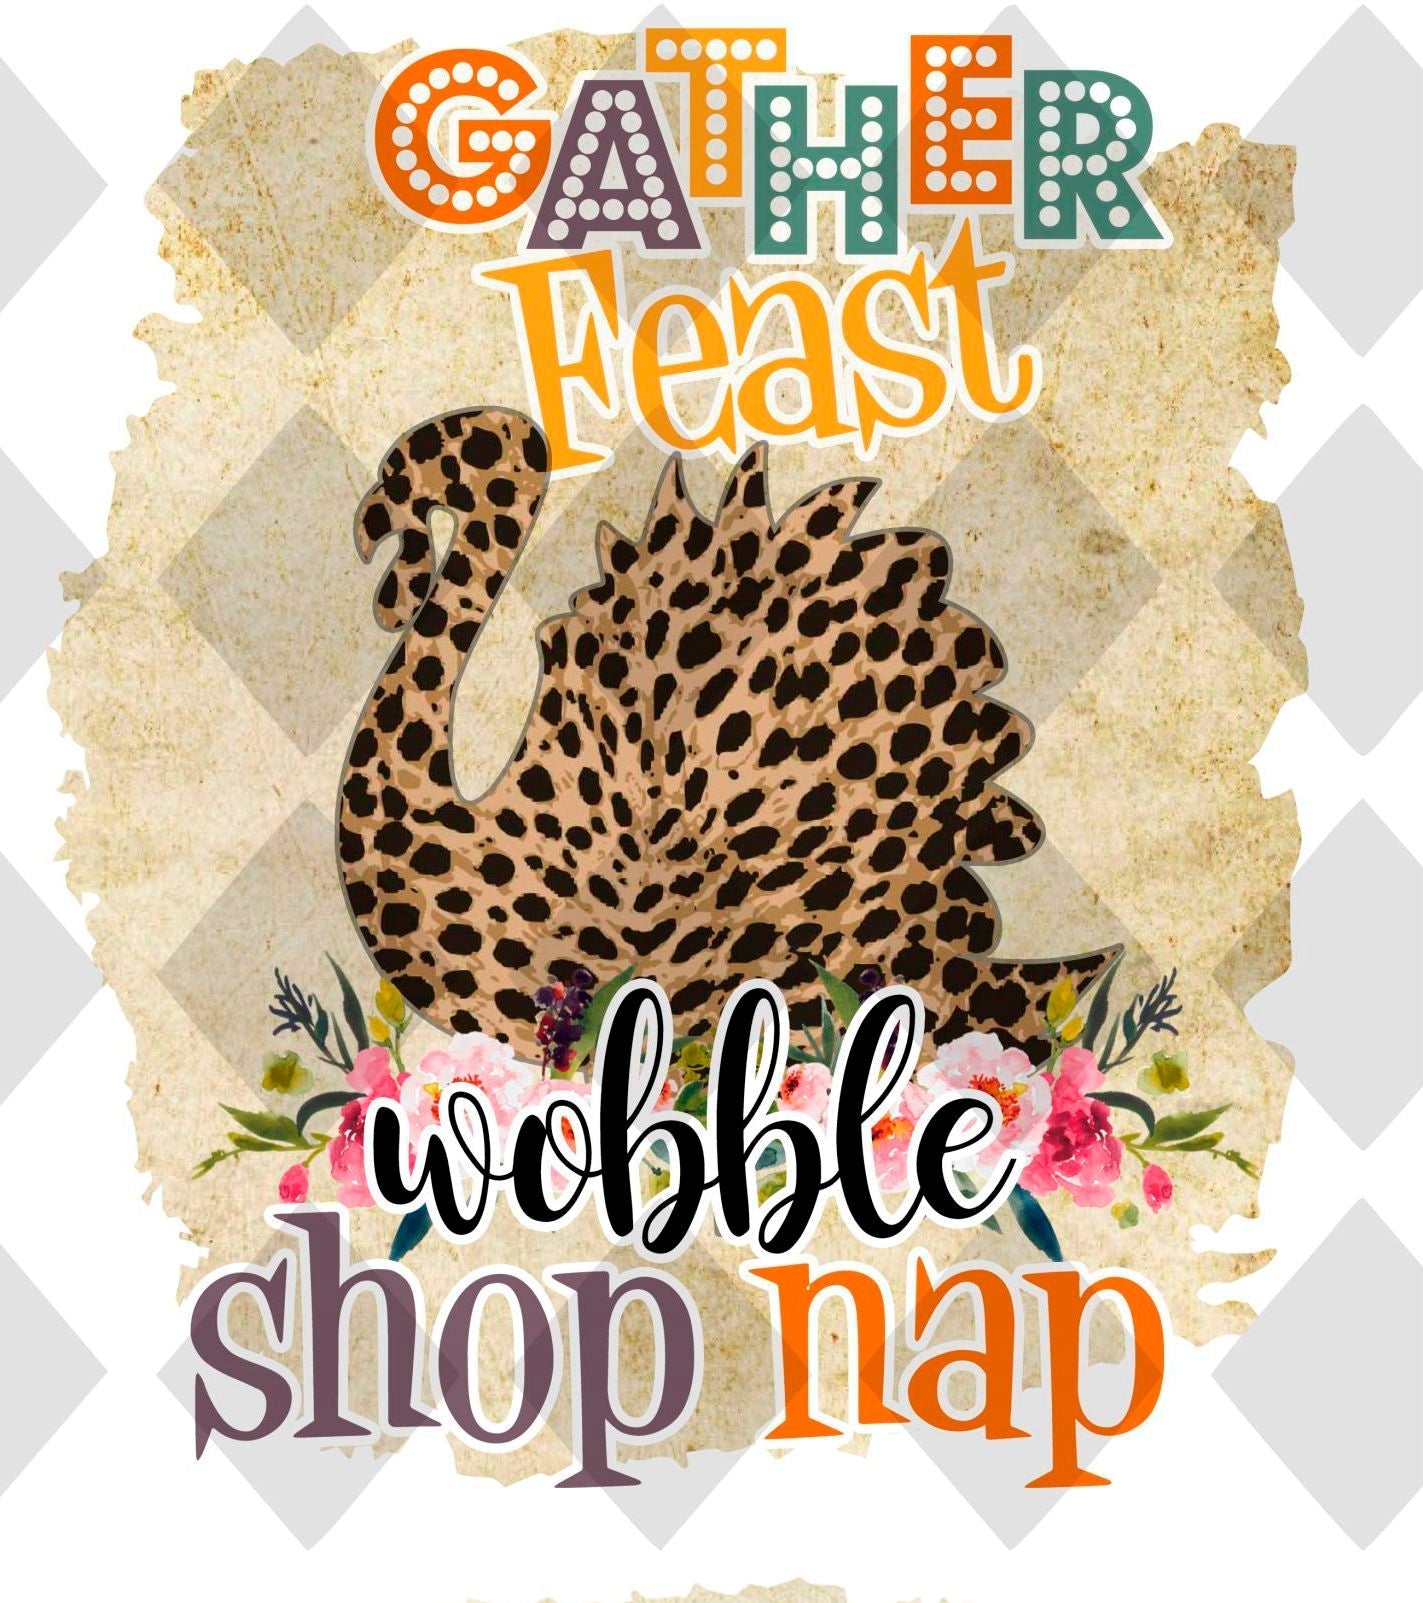 Gather feast wobble shop nap Digital Download Instand Download - Do it yourself Transfers